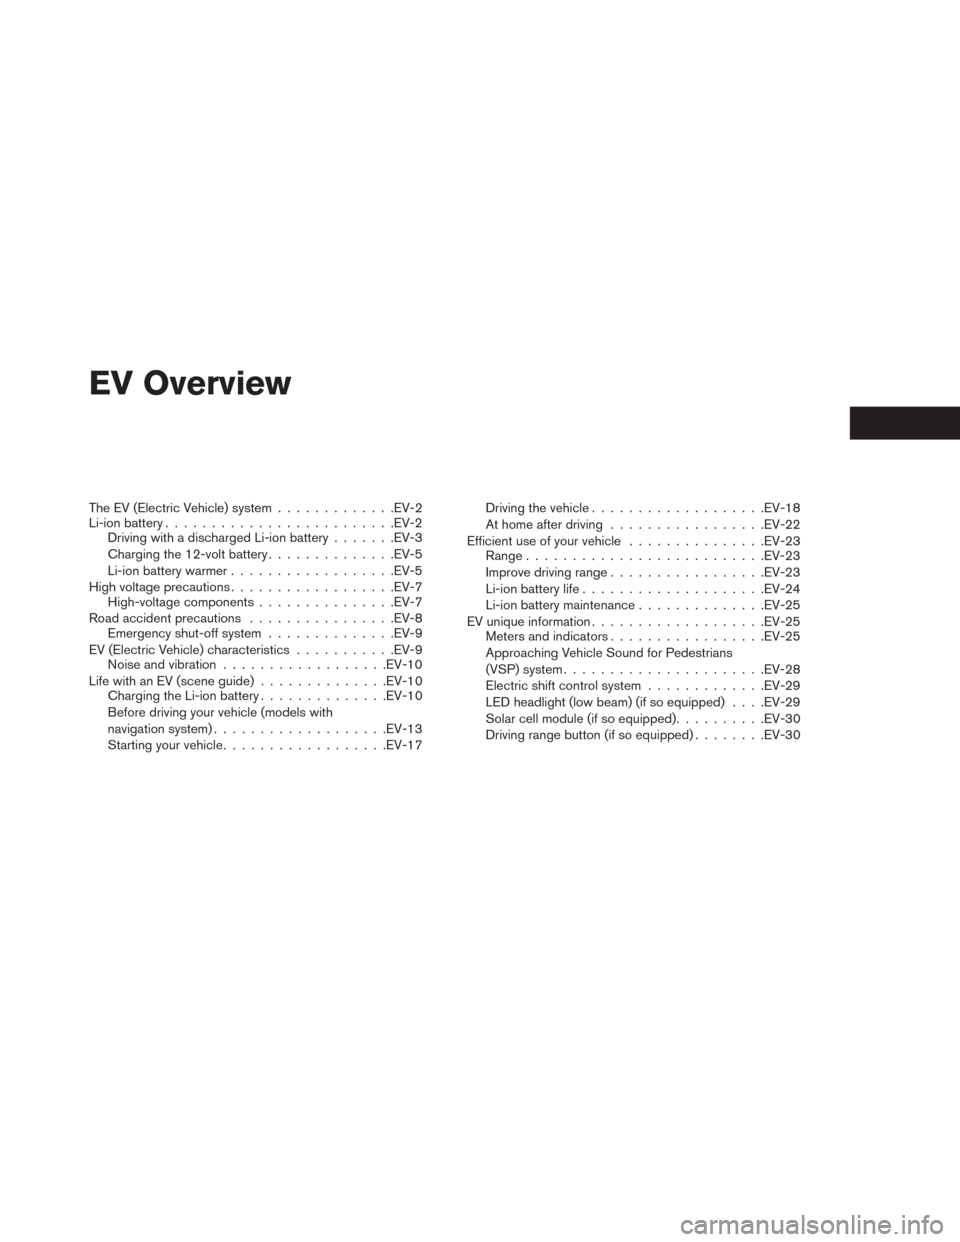 NISSAN LEAF 2014 1.G Owners Manual EV Overview
The EV (Electric Vehicle) system.............EV-2
Li-ion battery.........................EV-2
Driving with a discharged Li-ion battery.......EV-3
Charging the 12-volt battery..............